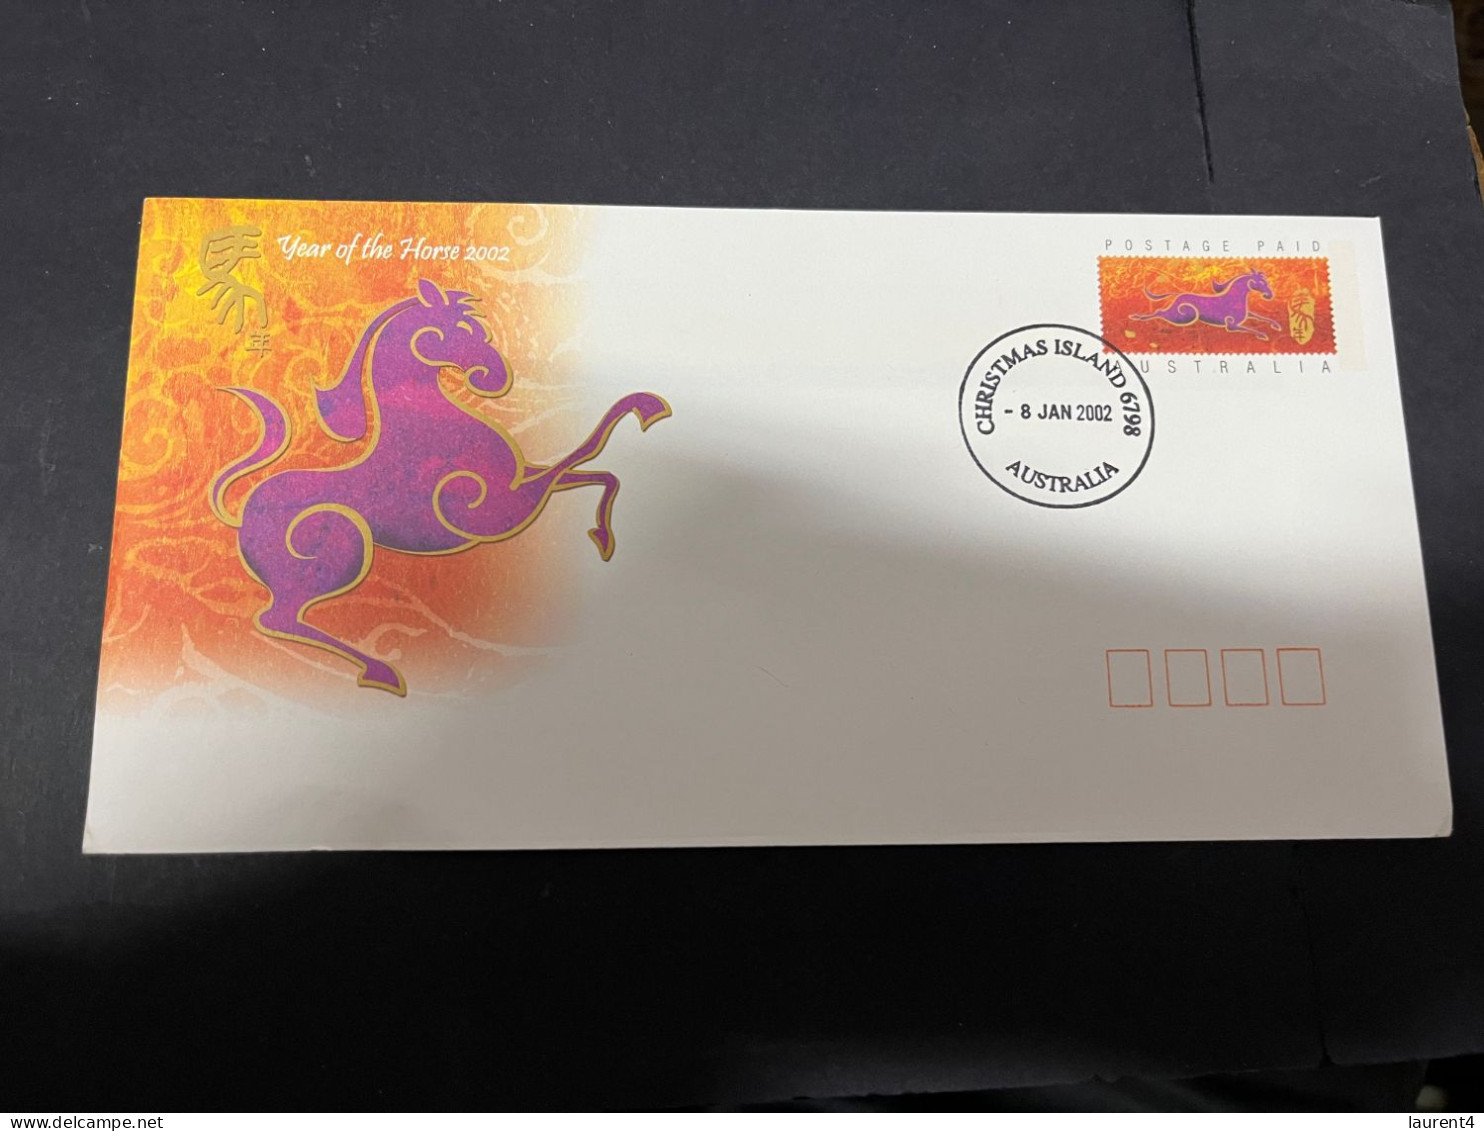 21-3-2024 (3 Y 39) Australia Christmas Island FDC - 2002 (2 Aerogramme Cover) Chinese New Year Of The Horse - Christmas Island